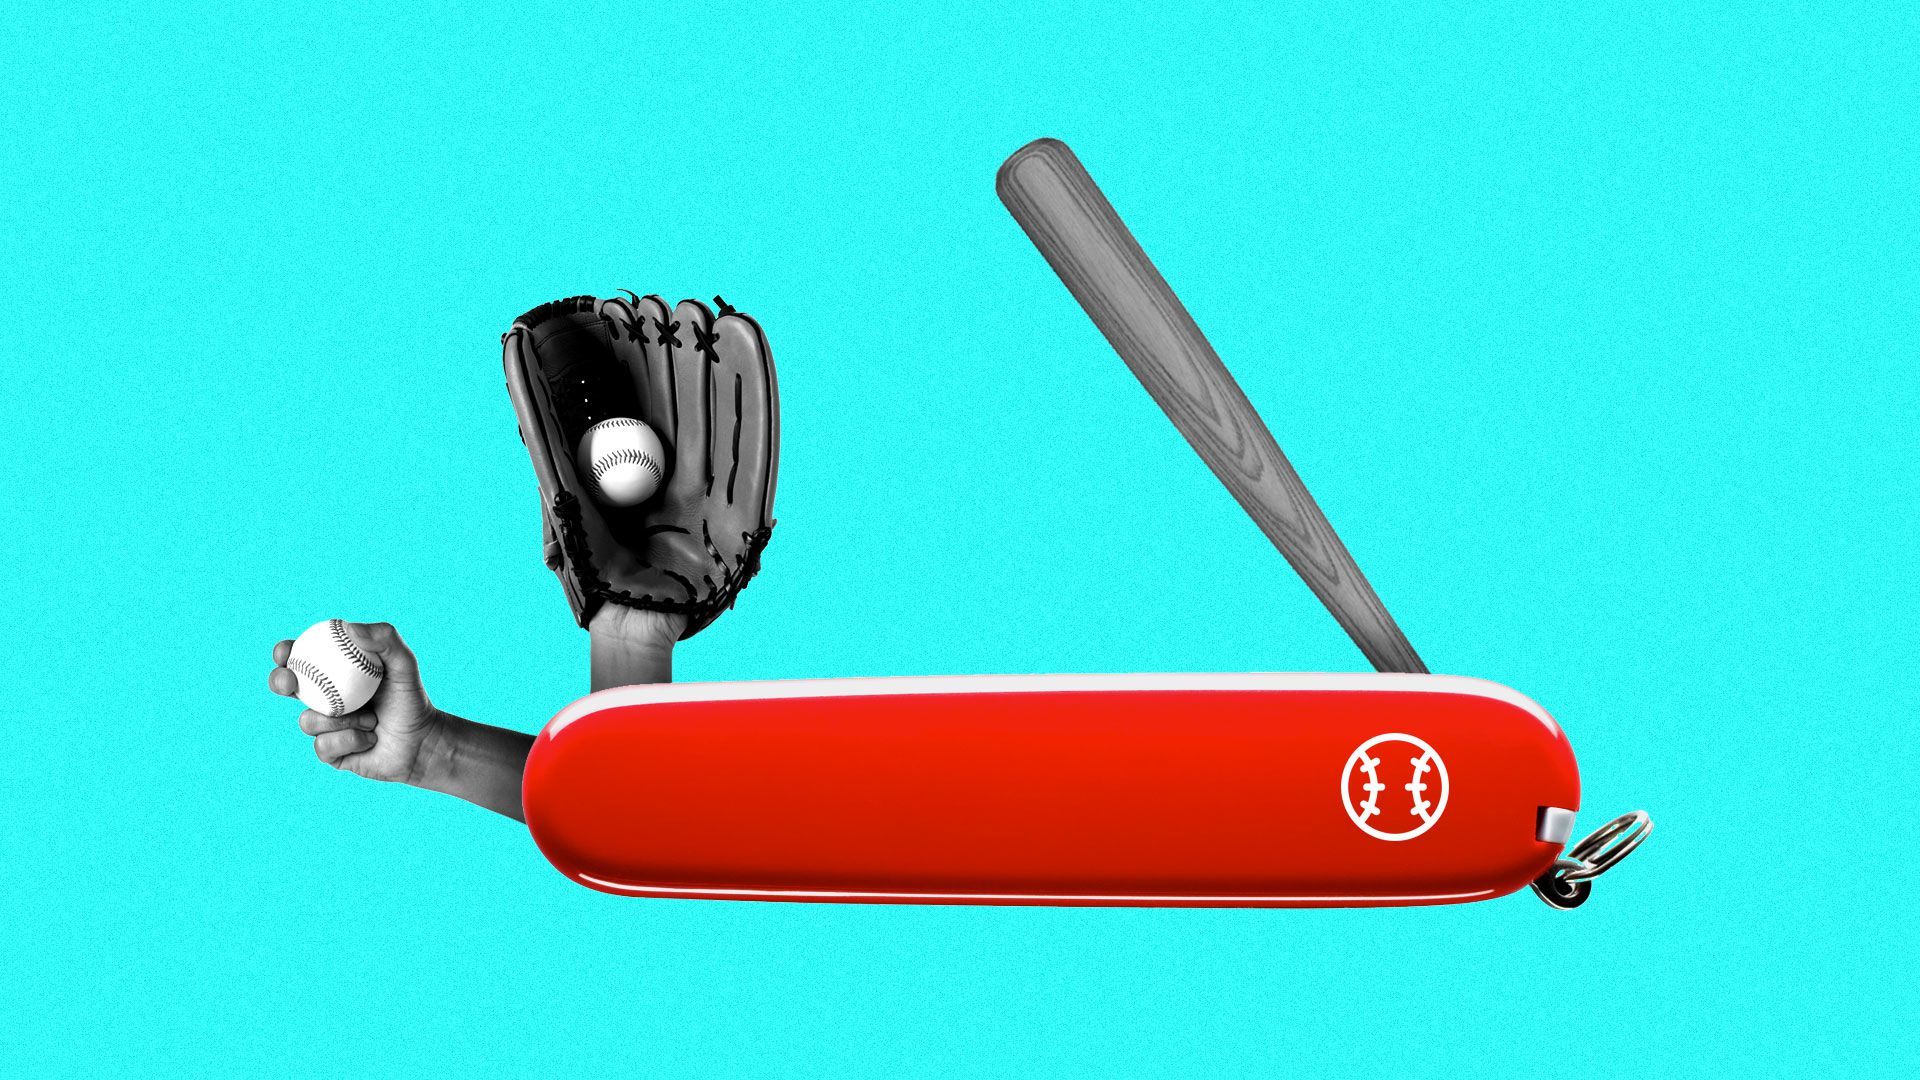 A Swiss army knife with a pitcher's mitt and hand on one end, and a baseball bat on the other end